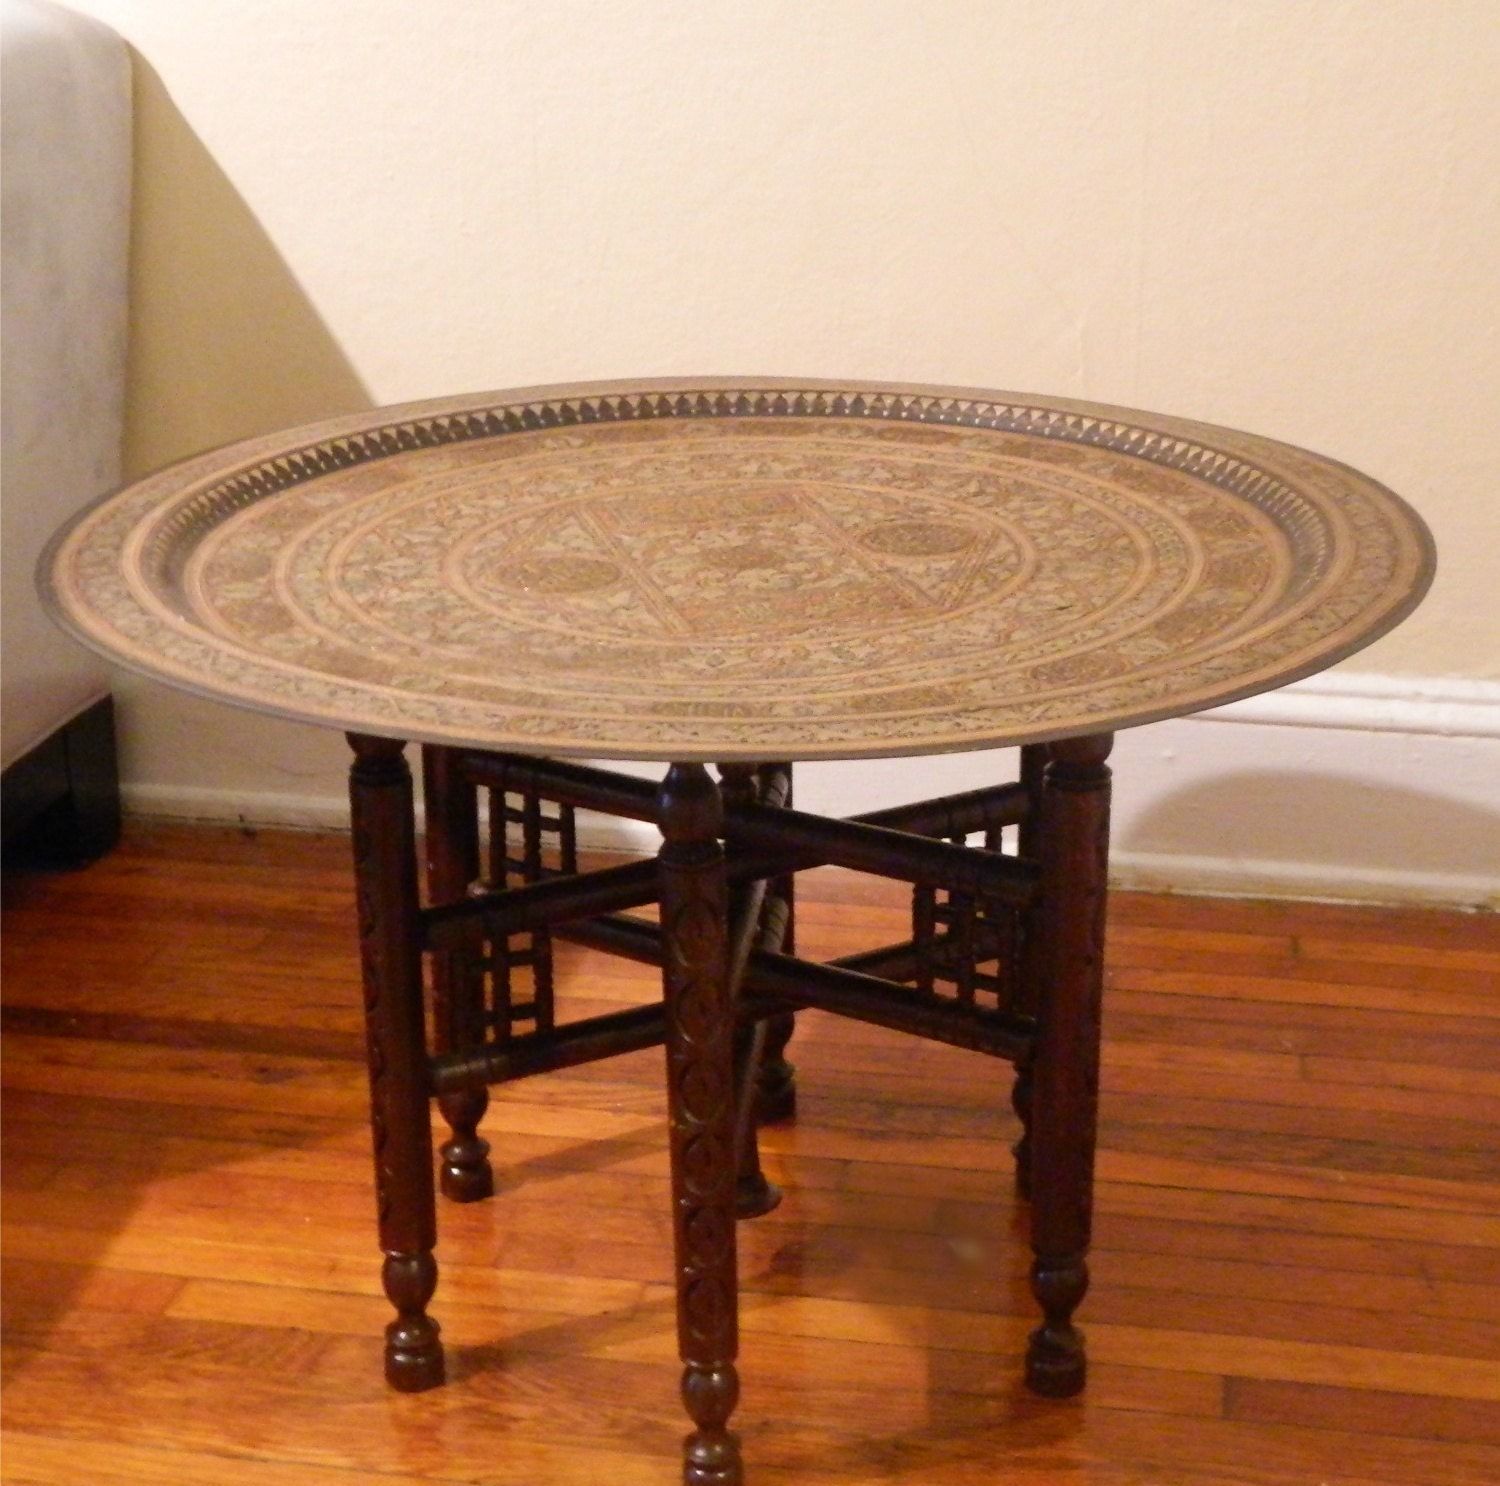 Sale: Round Moroccan Hammered Brass Tray Table With Regard To Antique Brass Aluminum Round Coffee Tables (View 4 of 15)